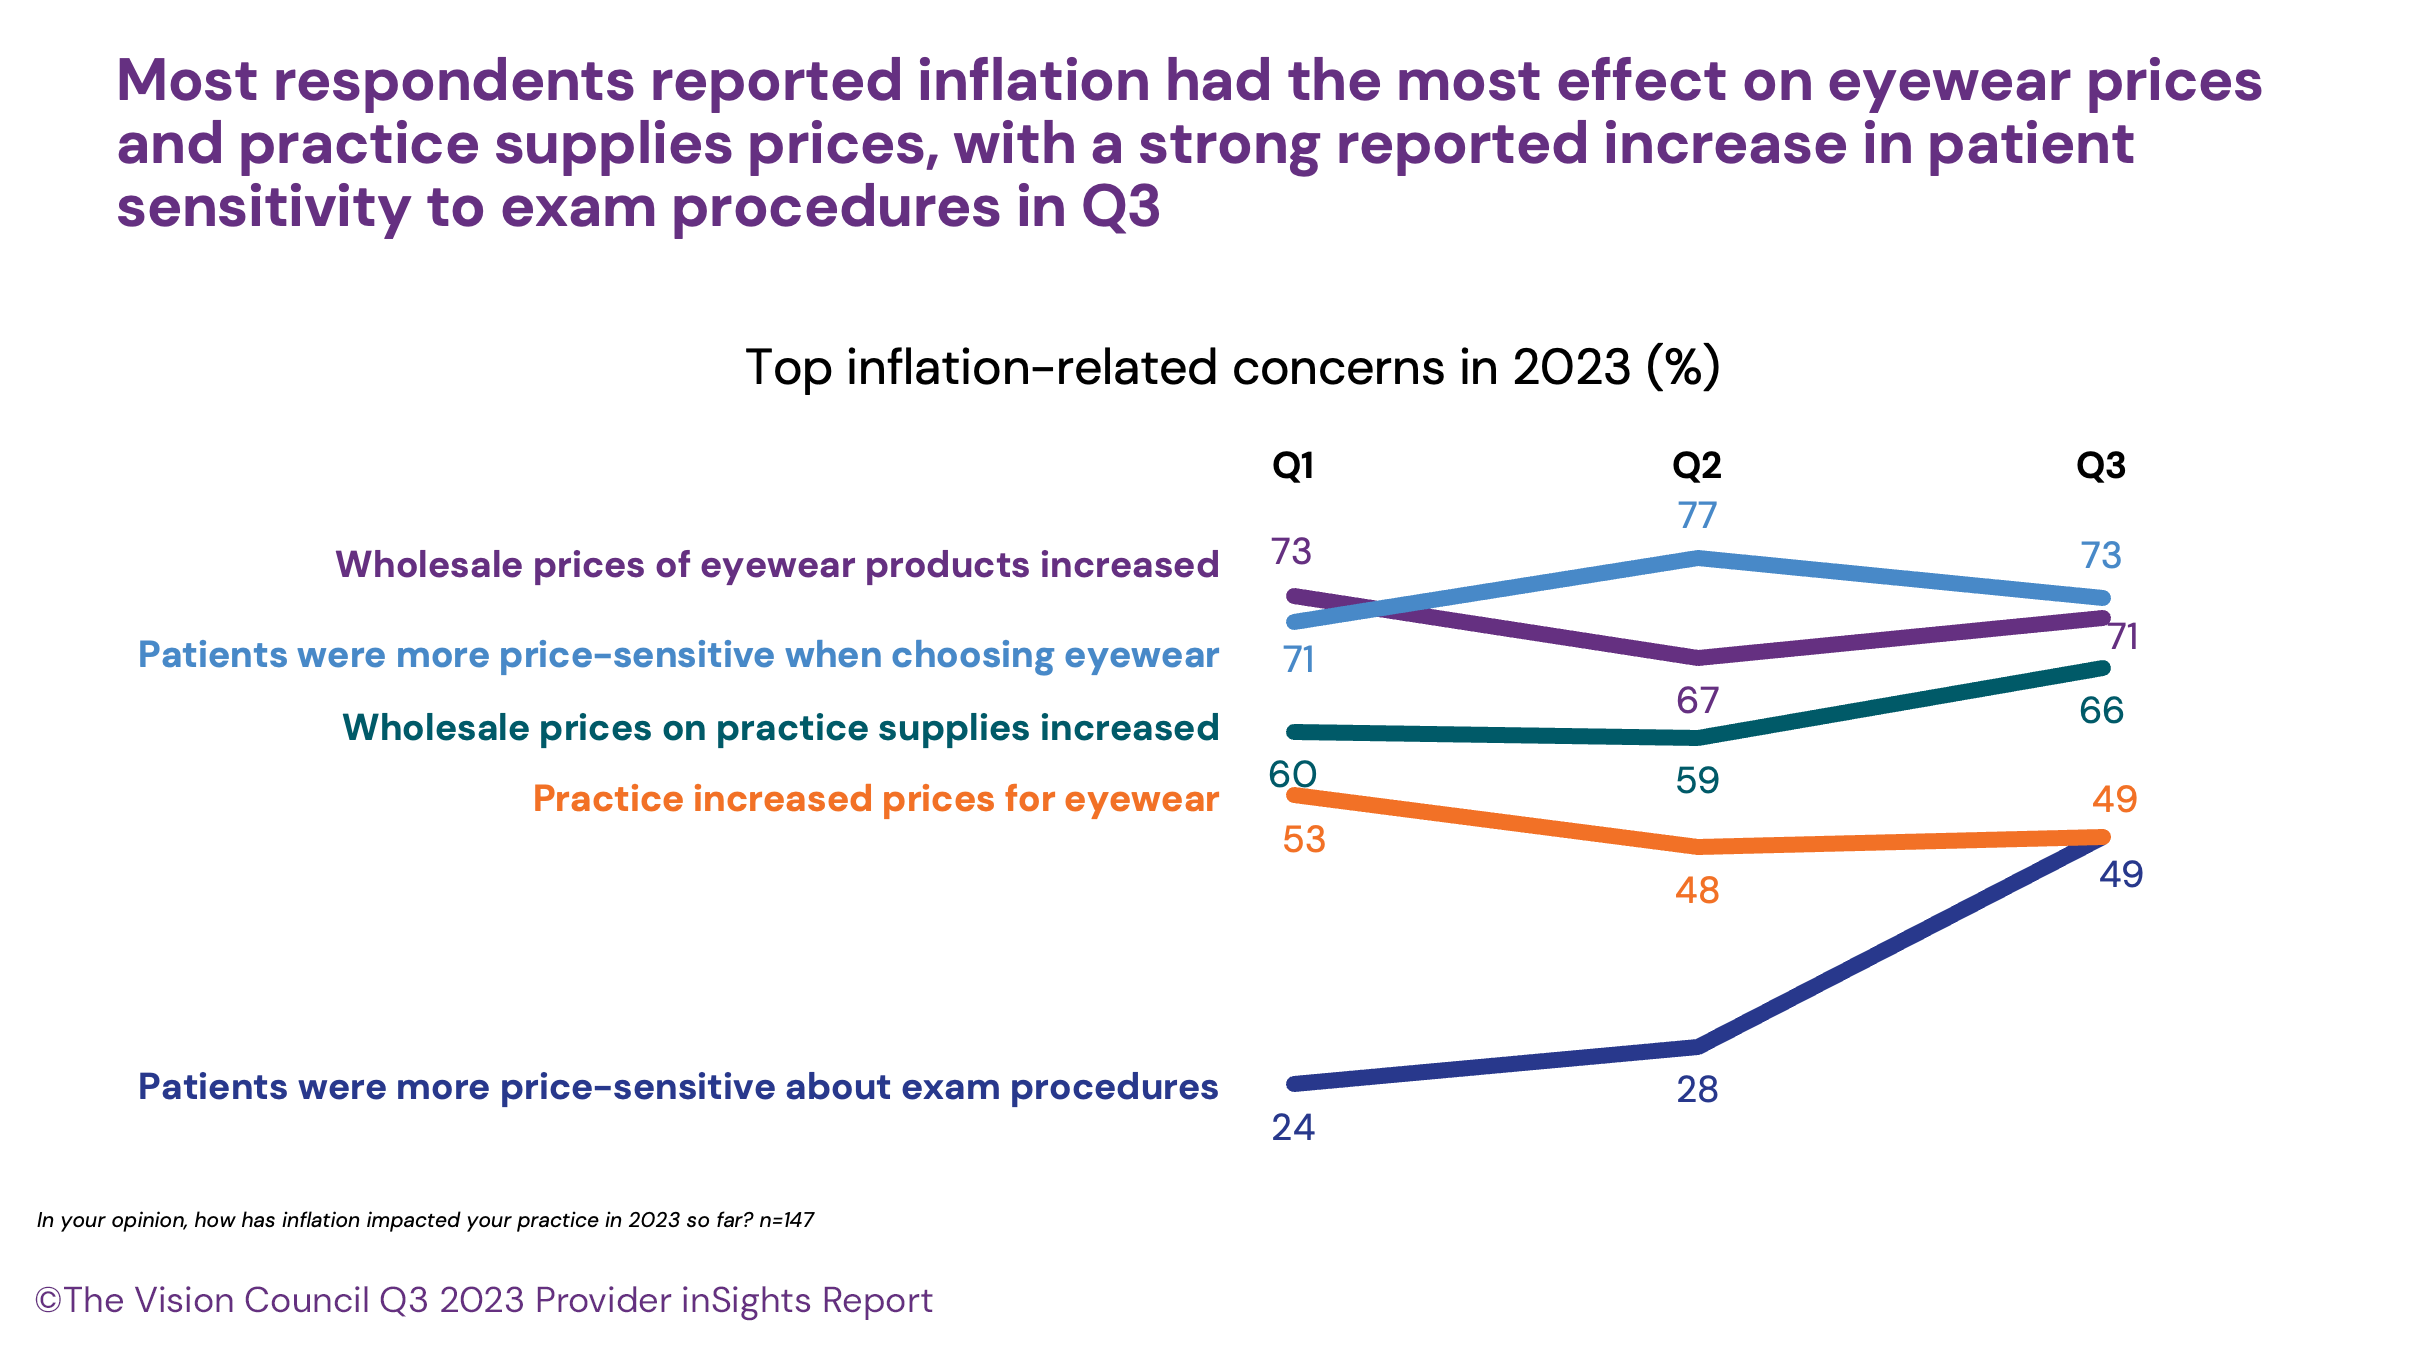 Most respondents reported inflation had the most effect on eyewear prices and practice supplies prices, wiht a strong reported increase in patient sensitivity to exam procedures in Q3